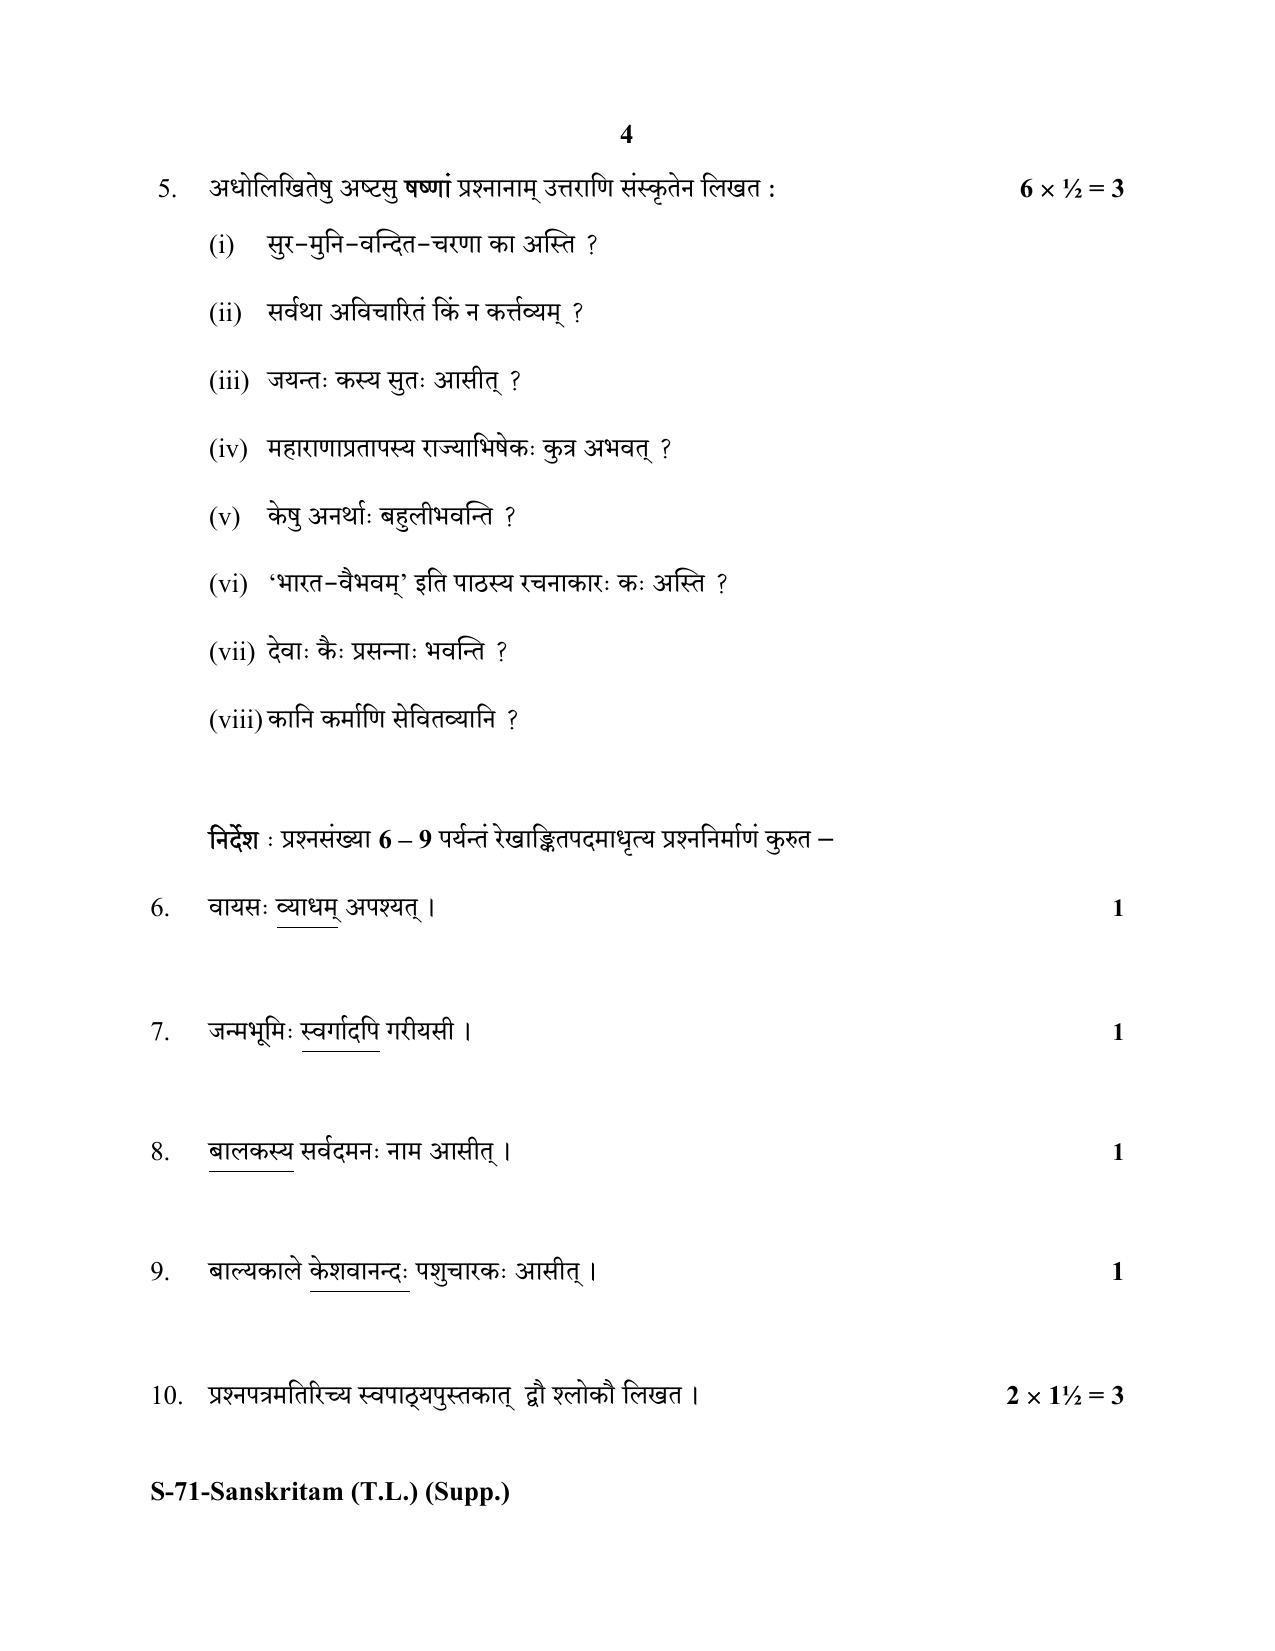 RBSE Class 10 Sanskrit TL Supplementary 2020 Question Paper - Page 4